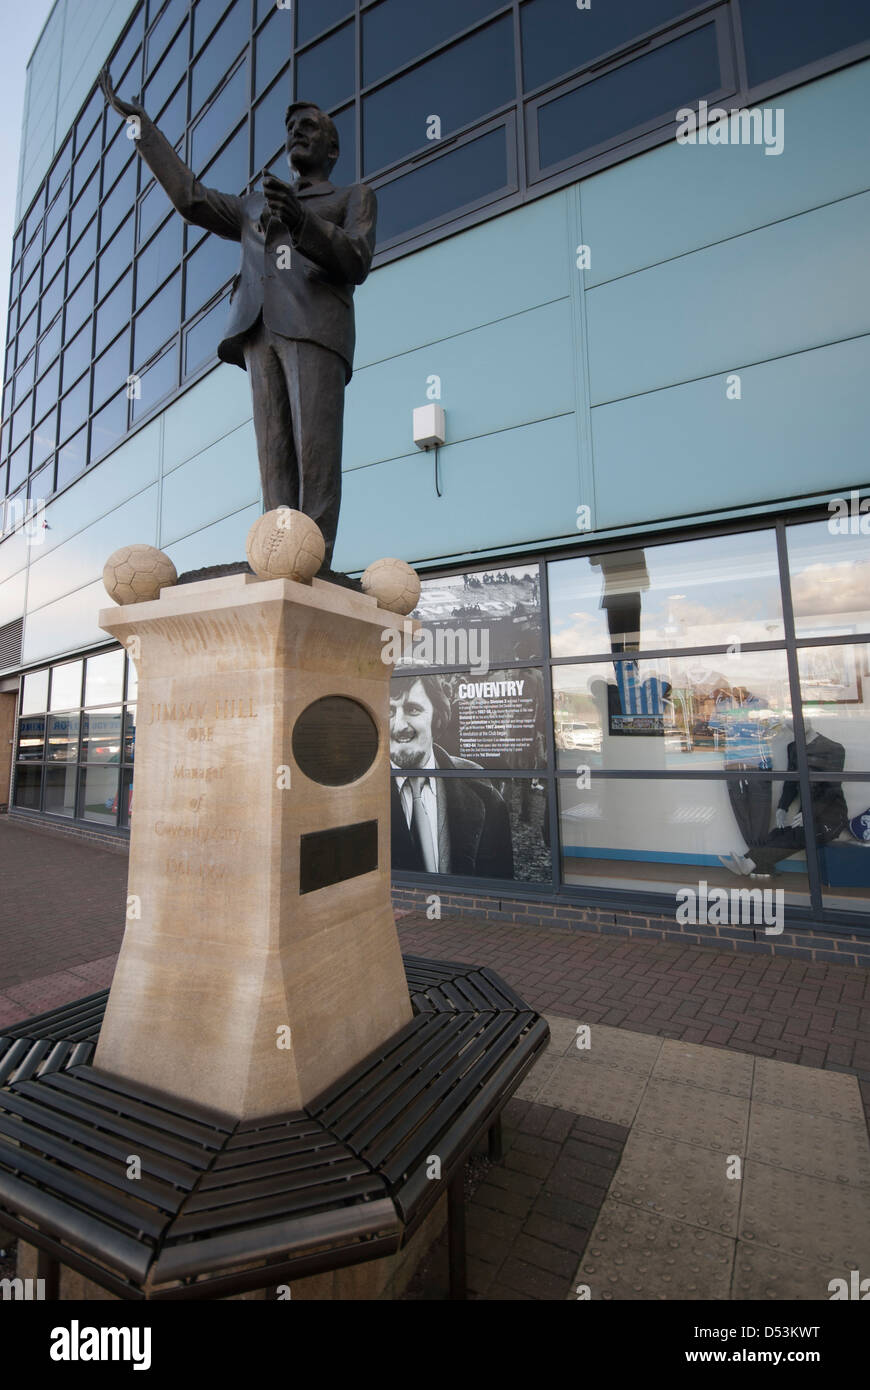 Jimmy Hill Bronze Statue Ricoh Arena Coventry Stock Photo